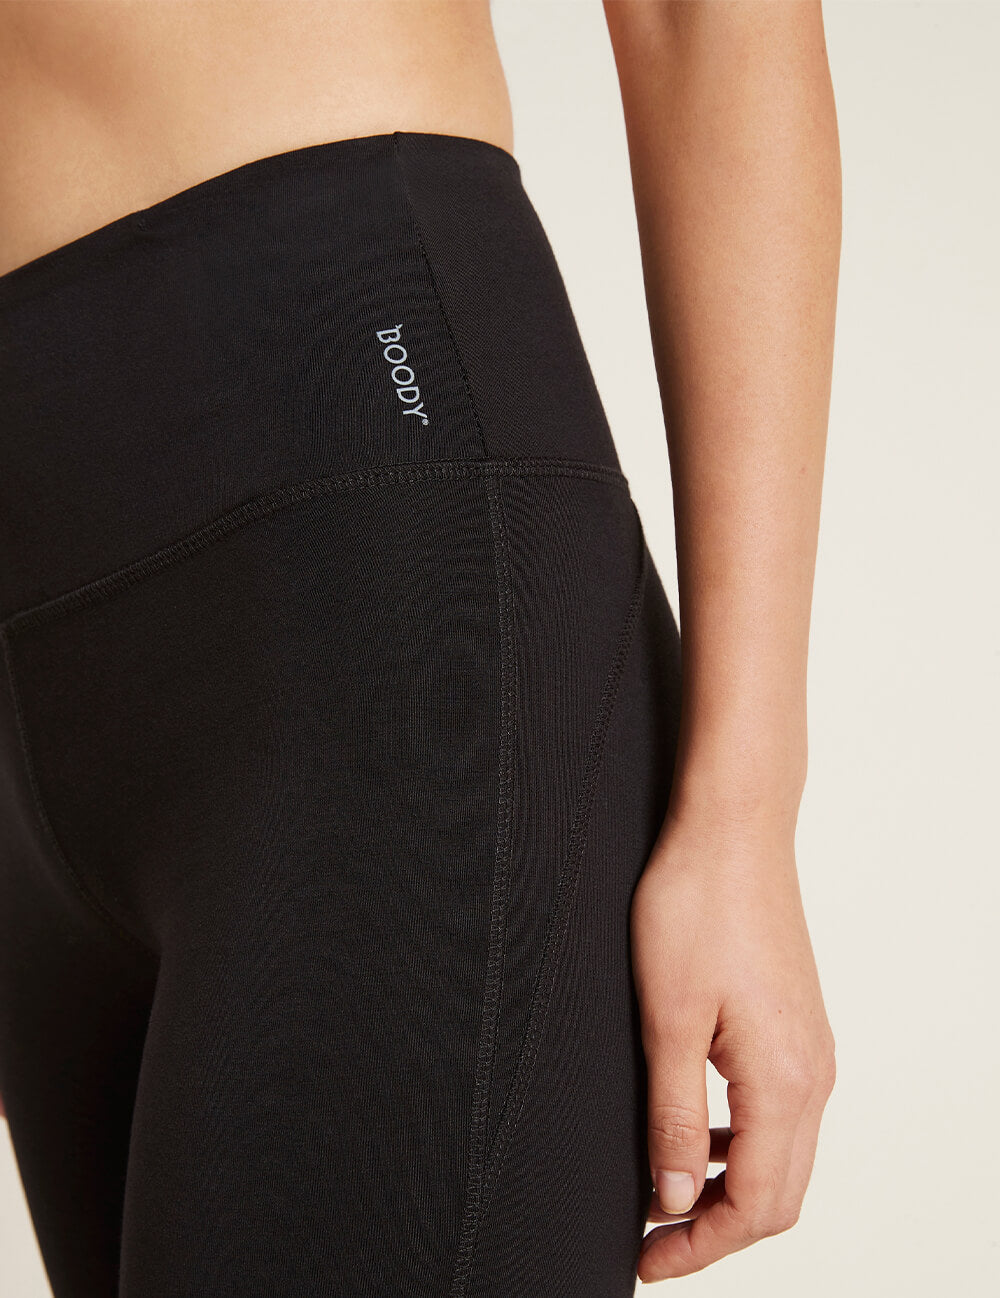 Boody Bamboo Active Blended High-Waisted Full Exercise Leggings in Black High Waist Detail View